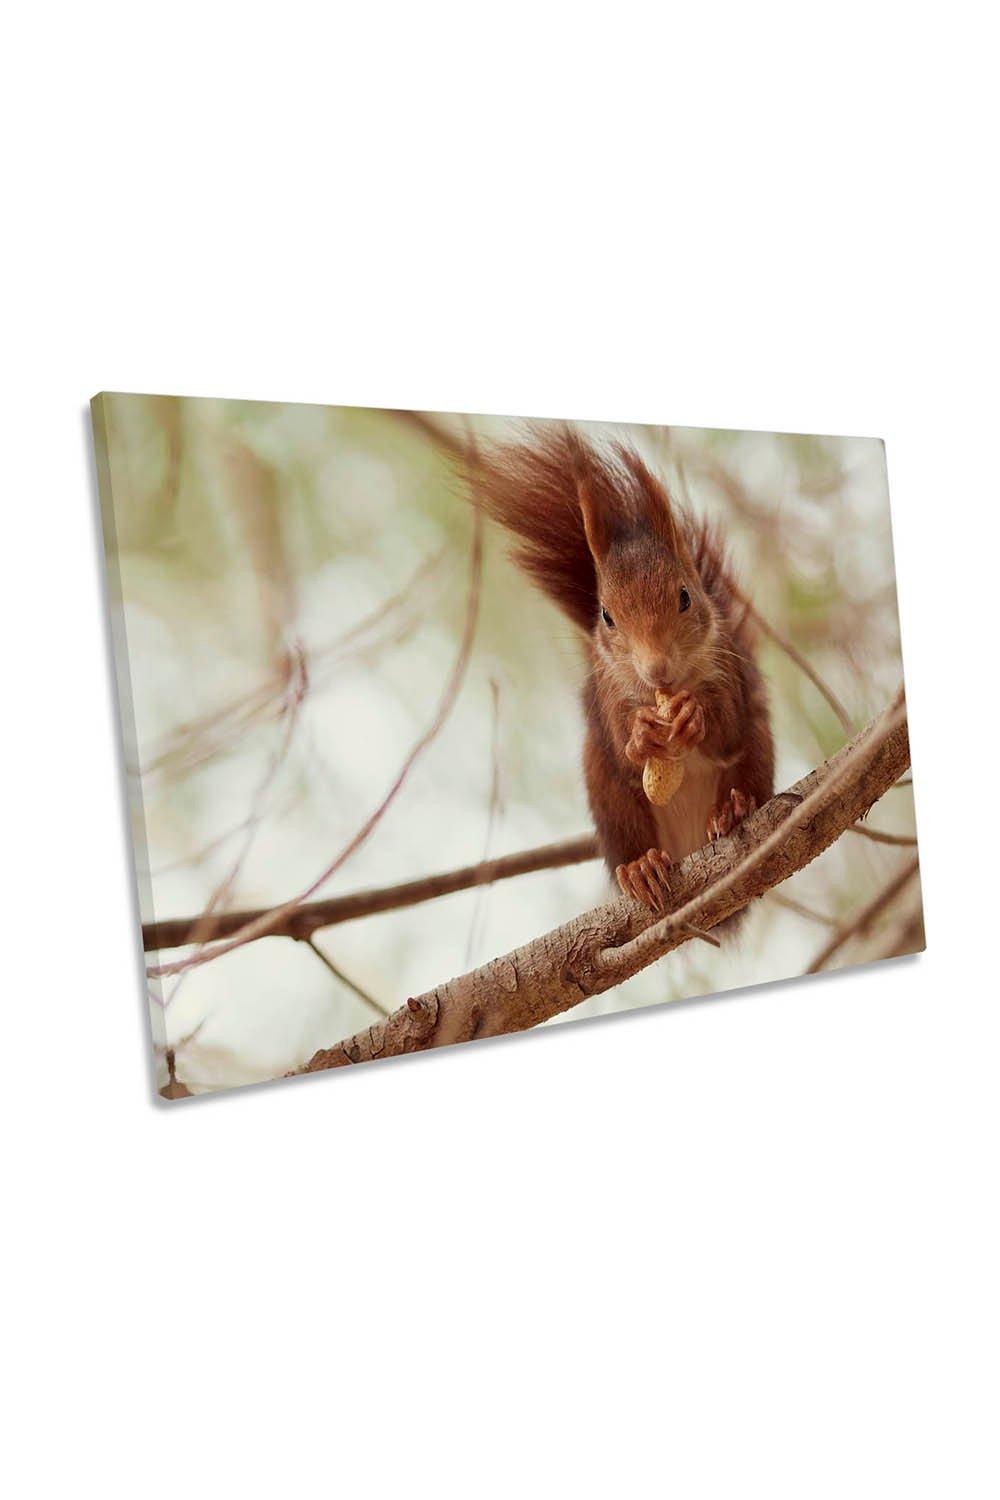 Squirrel Eating Nuts Branch Canvas Wall Art Picture Print